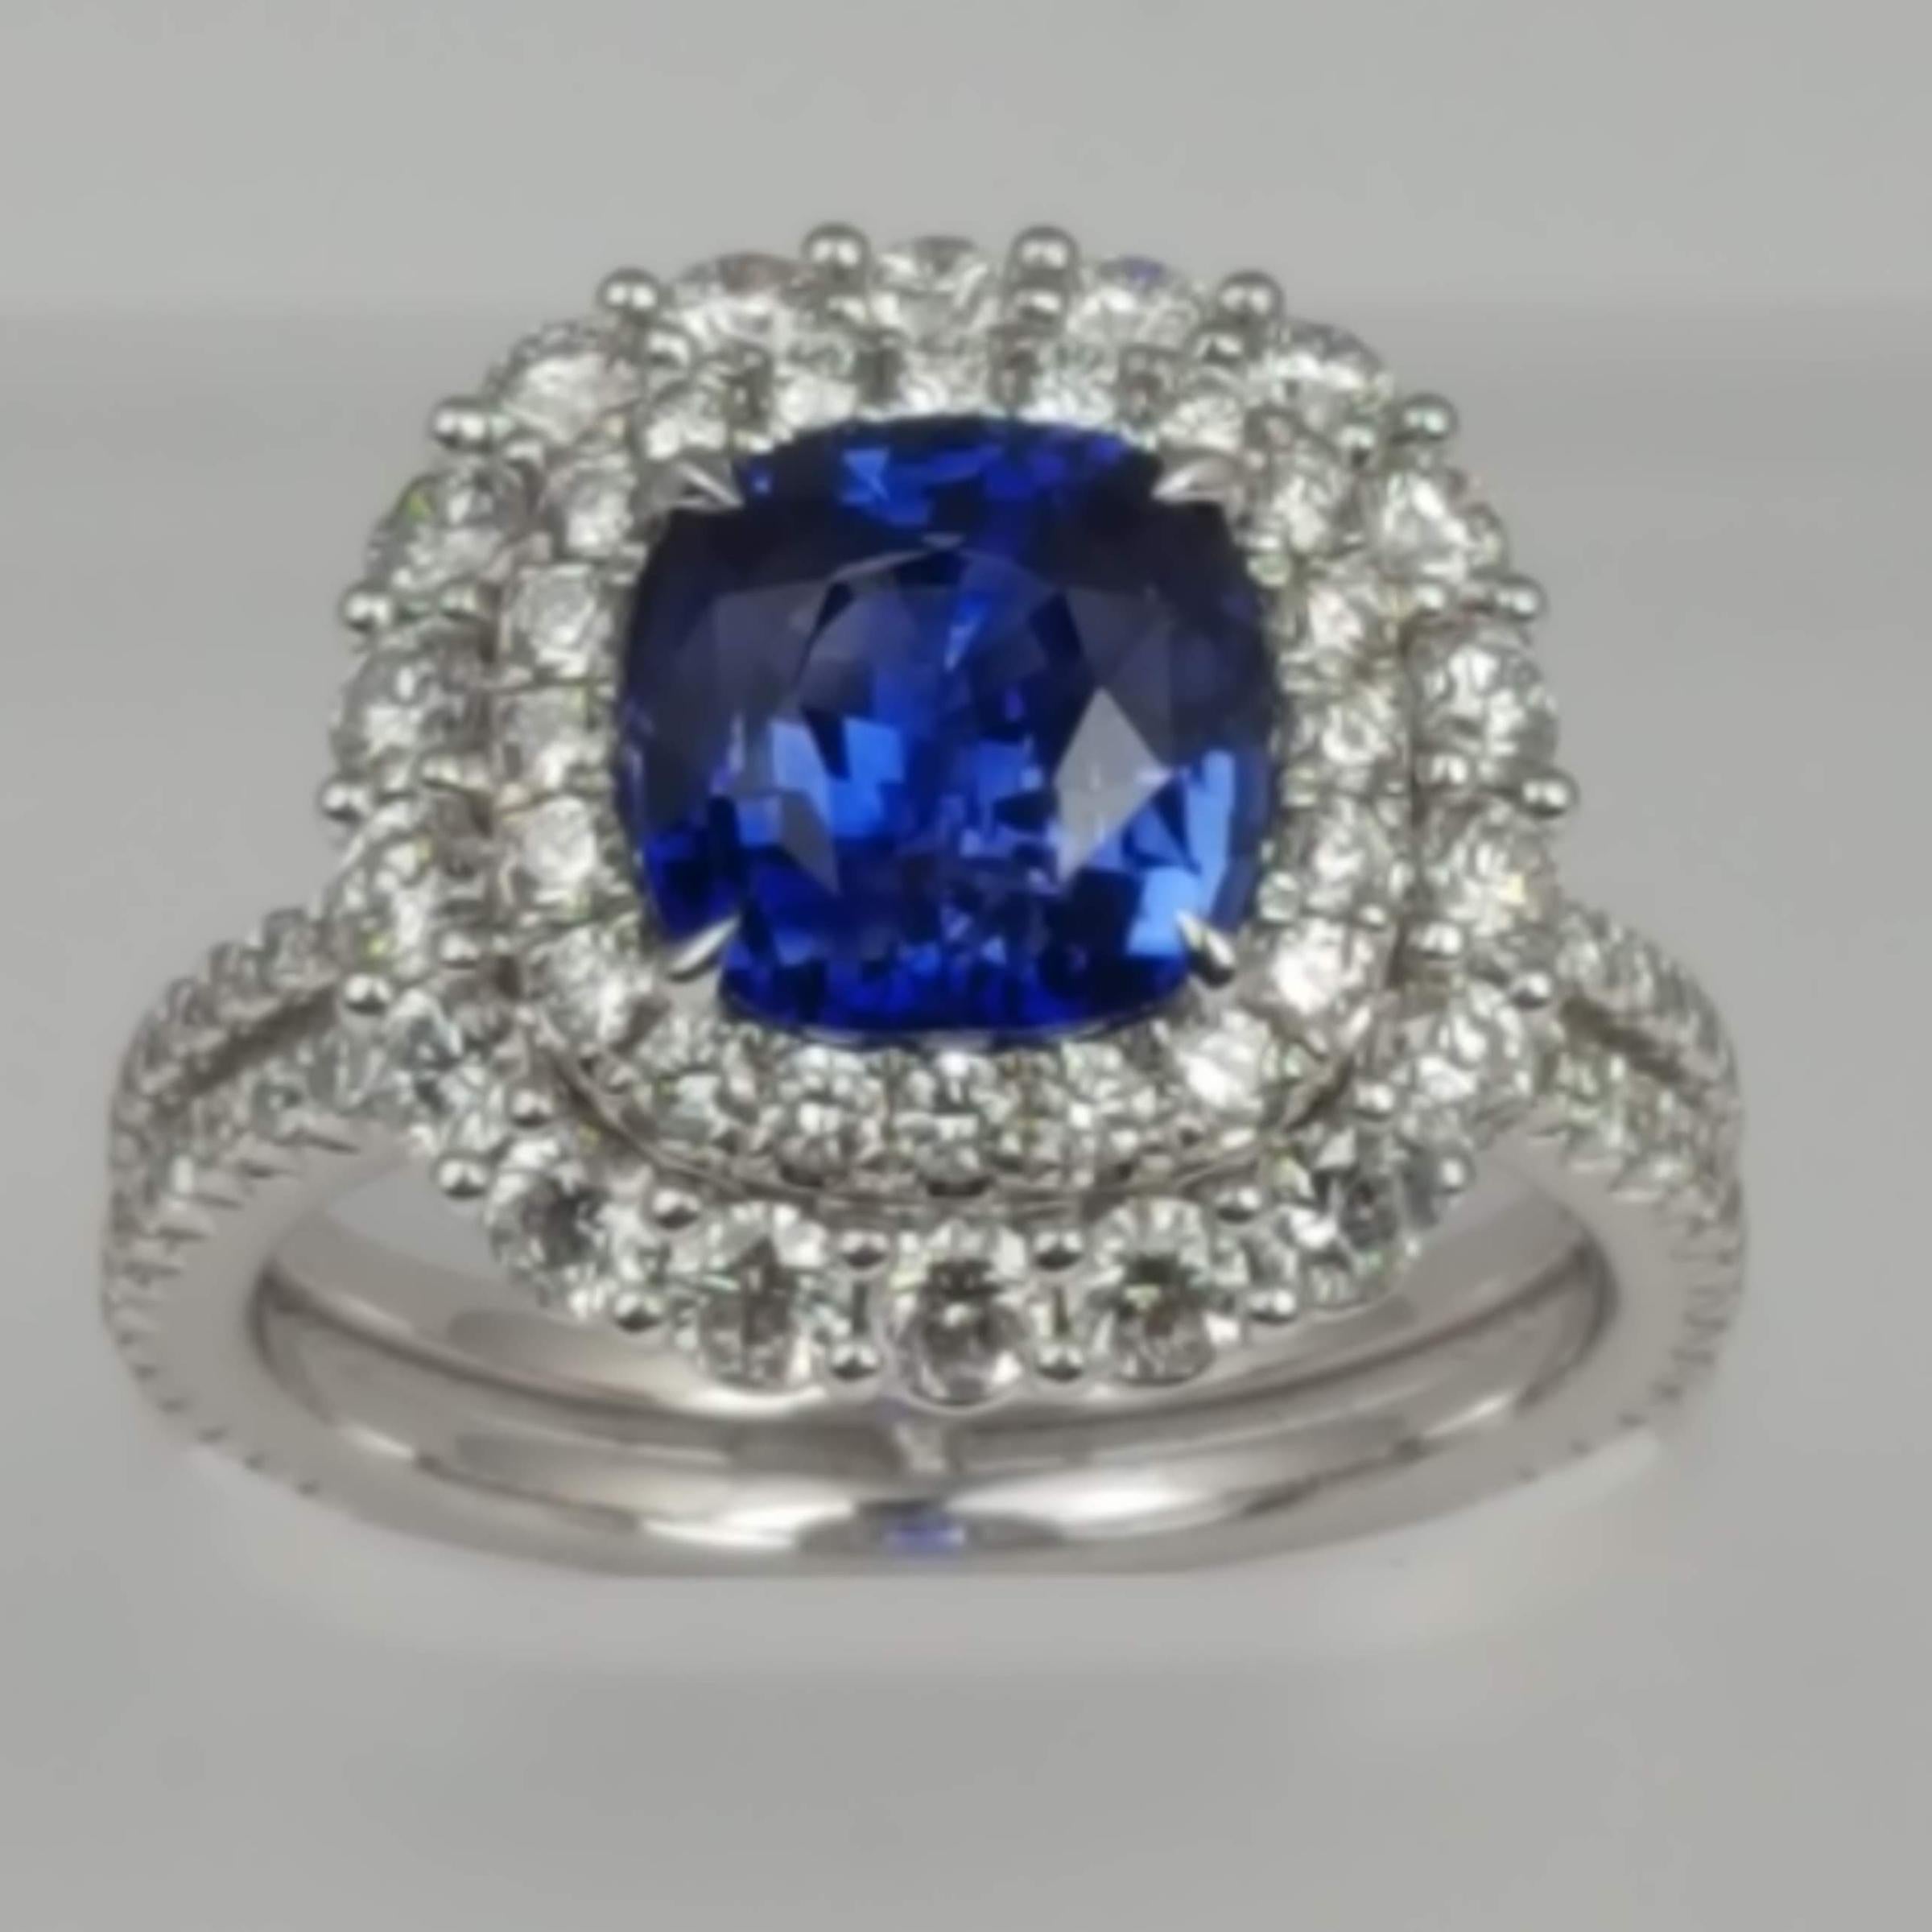 With a GIA Certified 2.72 carat cushion cut Ceylon Sapphire center, set inside a double halo of round white diamonds (total diamond weight 1.56 carats), this ring shines from every angle.

GIA Certification details (see photo):
The center sapphire